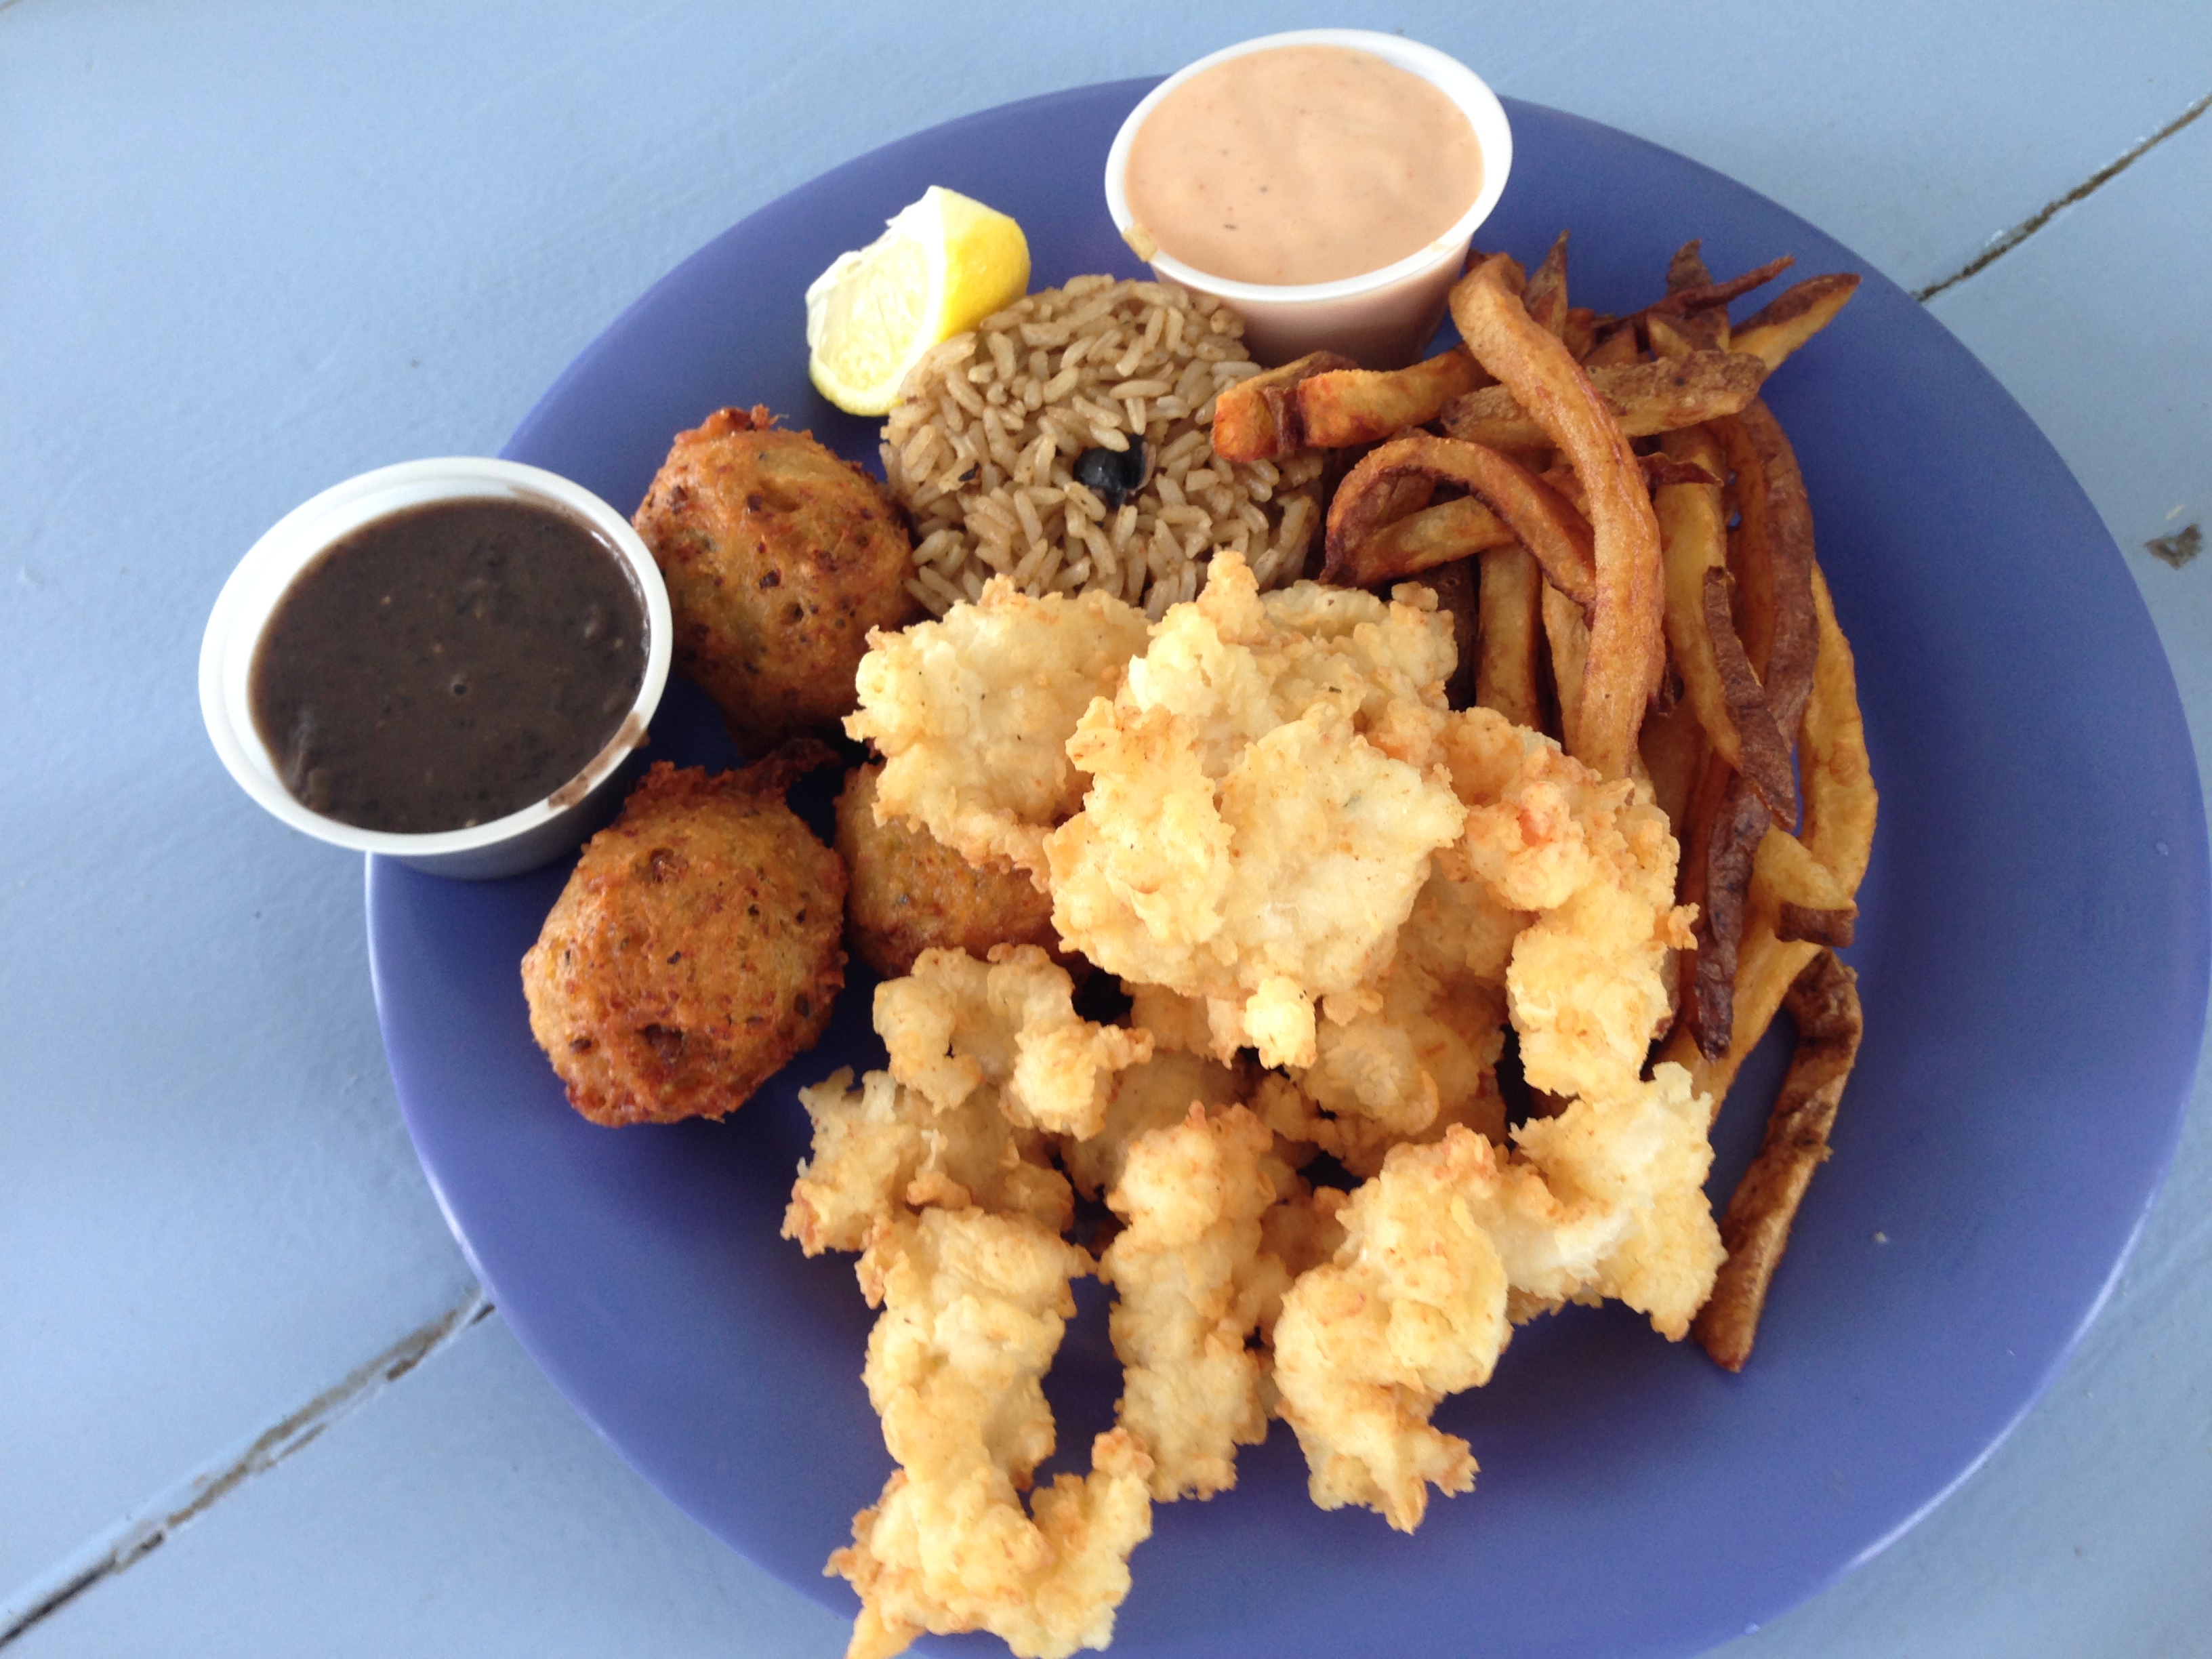 Conch Combo so much goodness. Cracked conch, conch fritters, peas & rice and Johnny fries